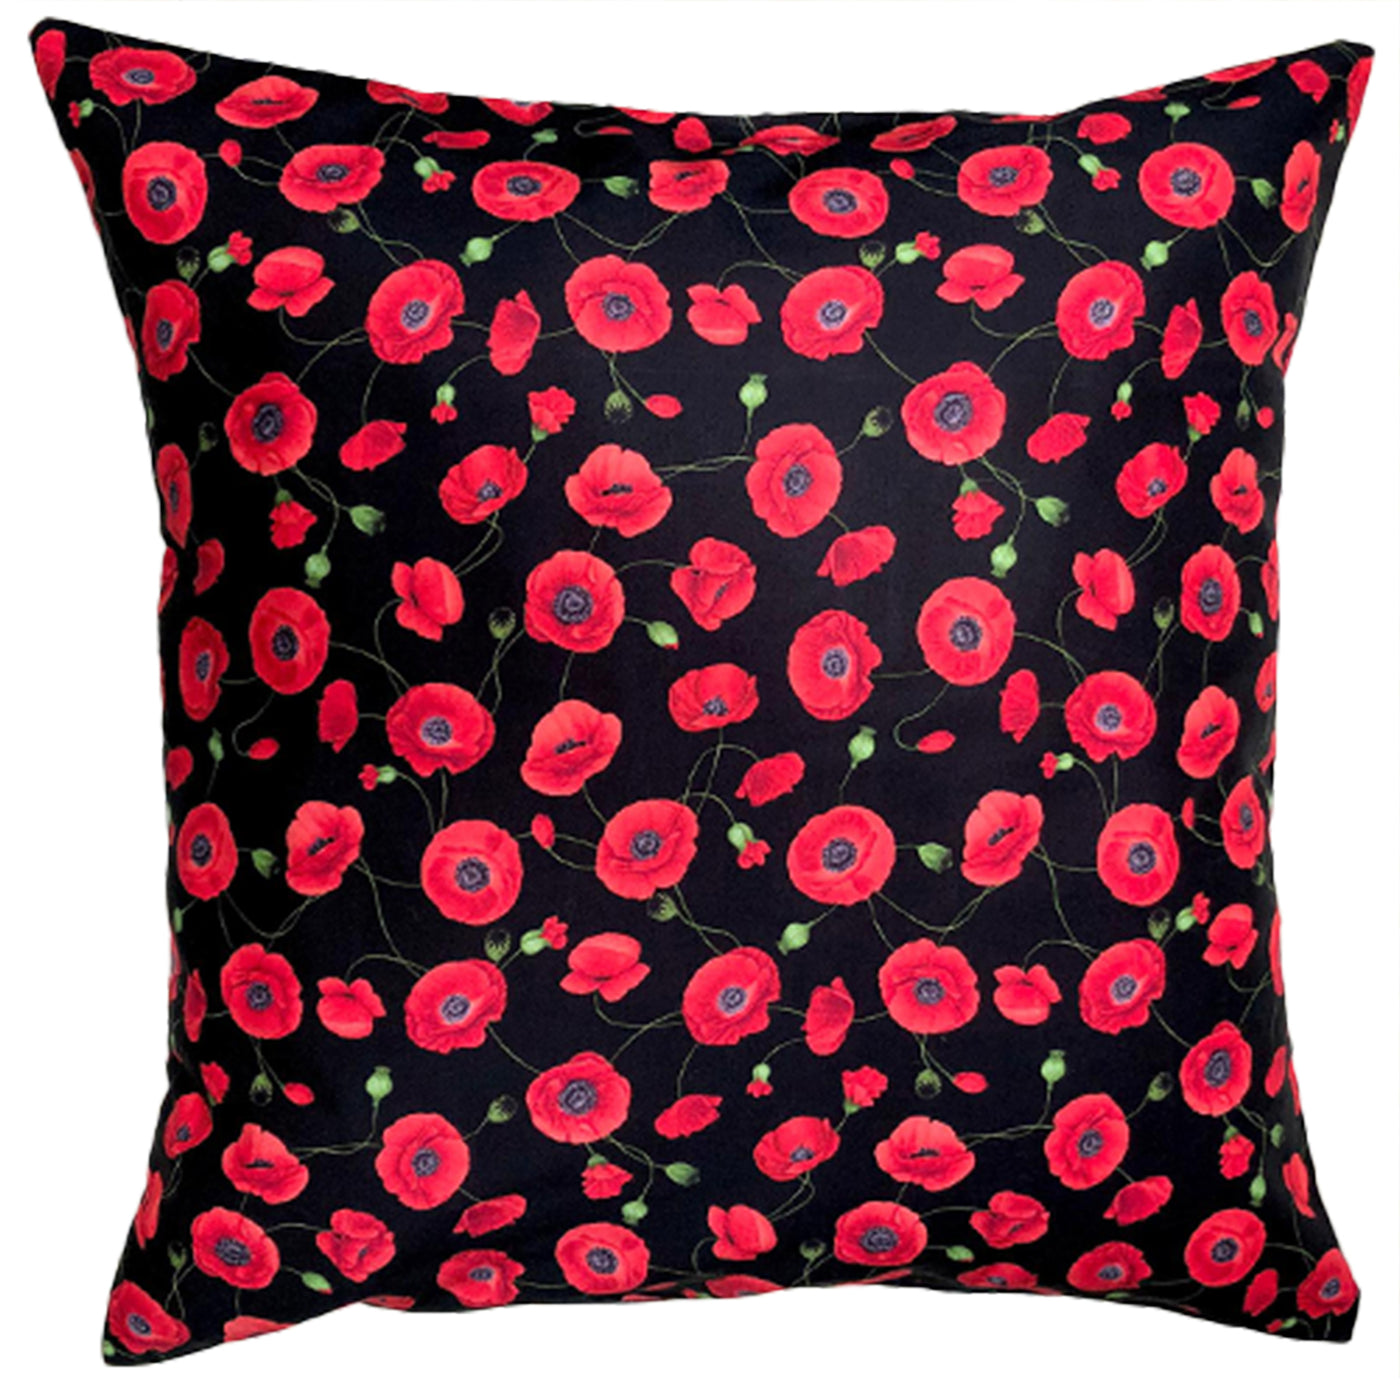 Floral & Fruit Cushion Covers Fit an 18 x 18 Scatter Cushion